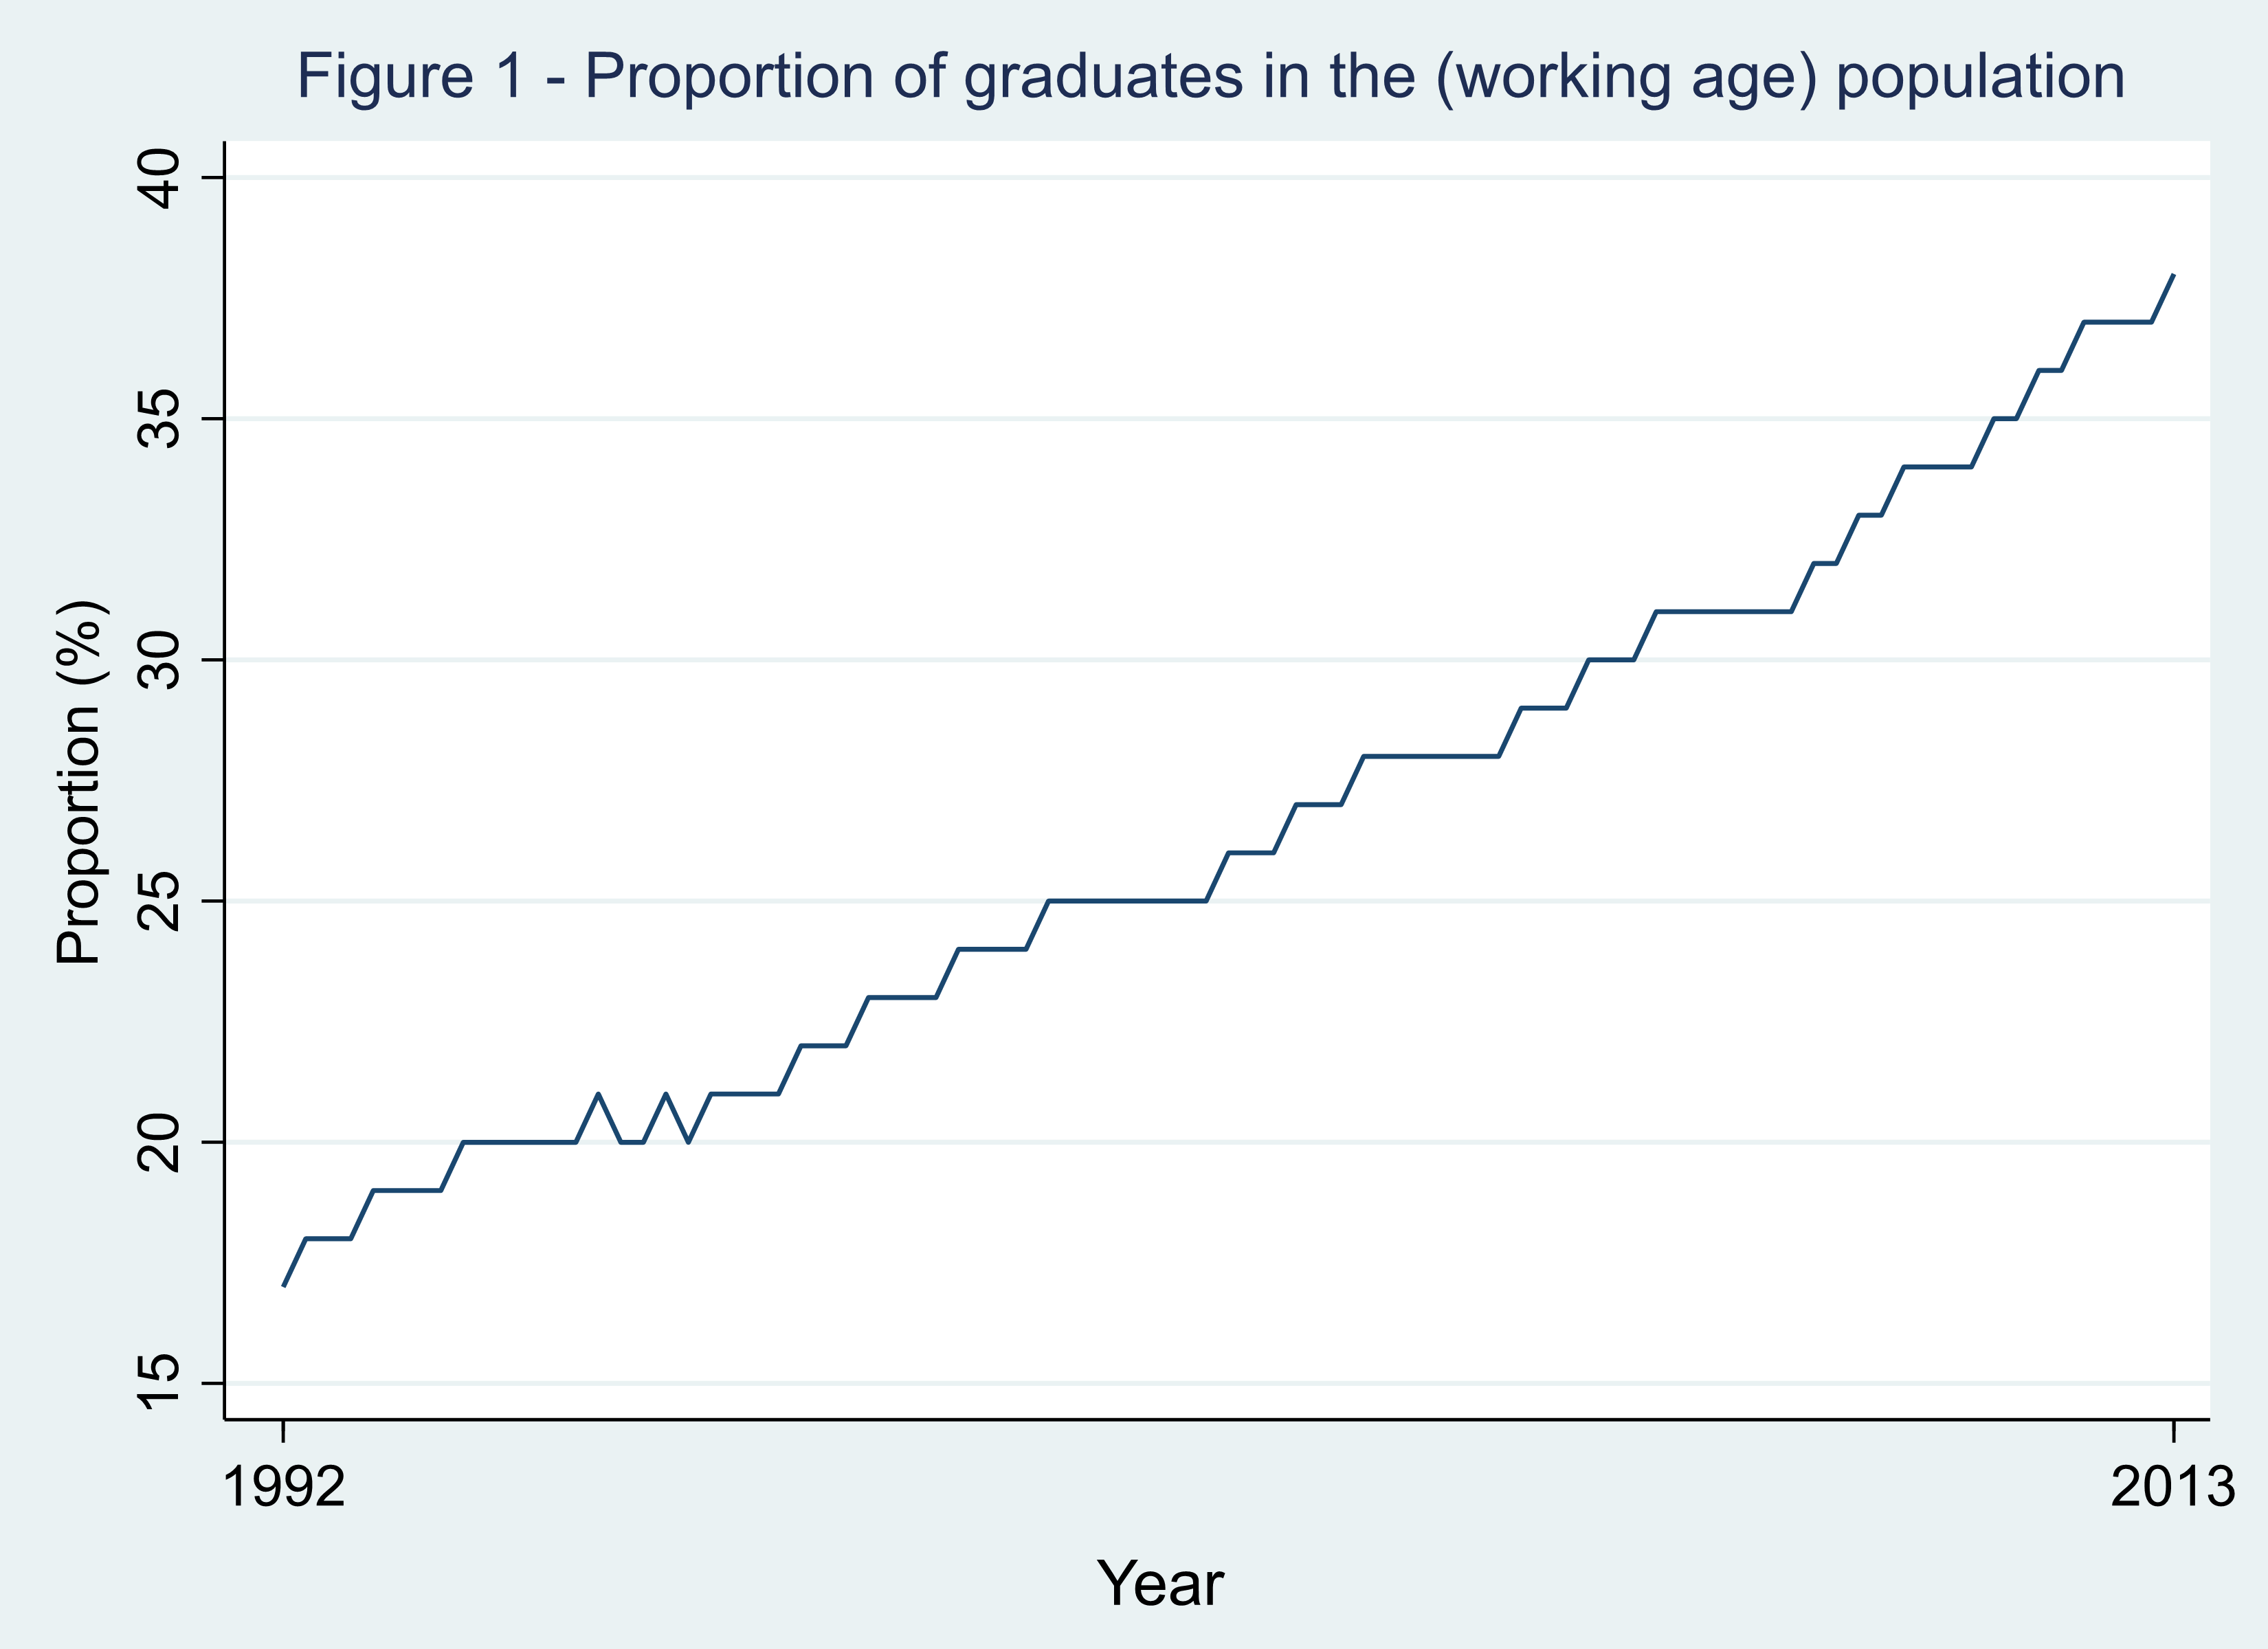 Line chart showing that the proportion of graduates in the working age population rose from 17% in 1992 to 38% in 2013